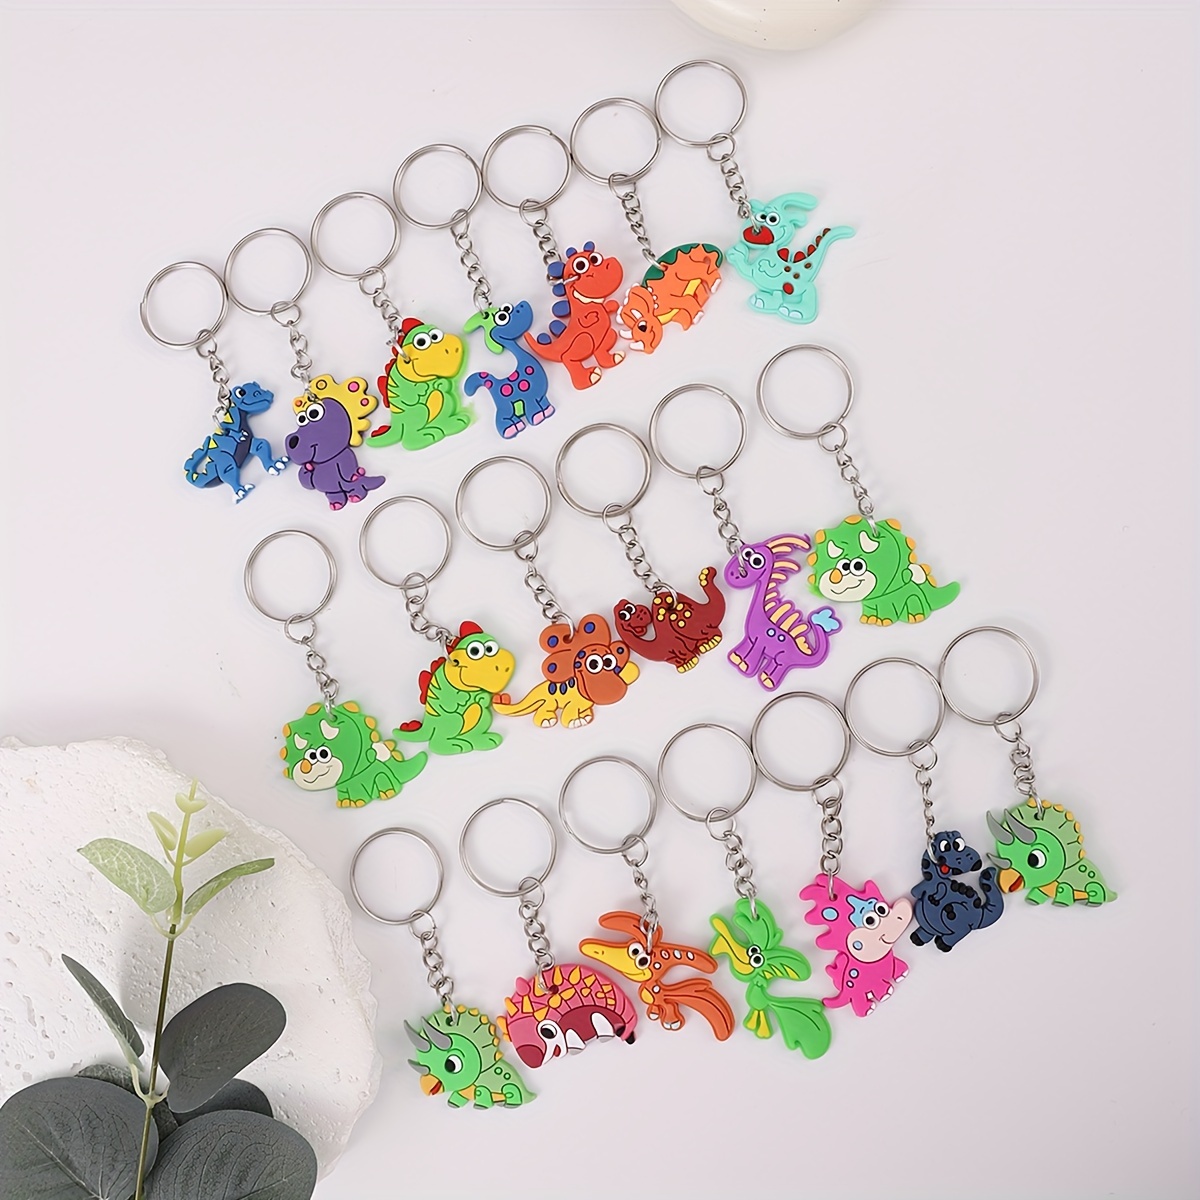 

20pcs/set Cute Dinosaur Keychain Candy Color Cartoon Hanging Pendant Silicone Keyring Bag Charms For Women Daily Use